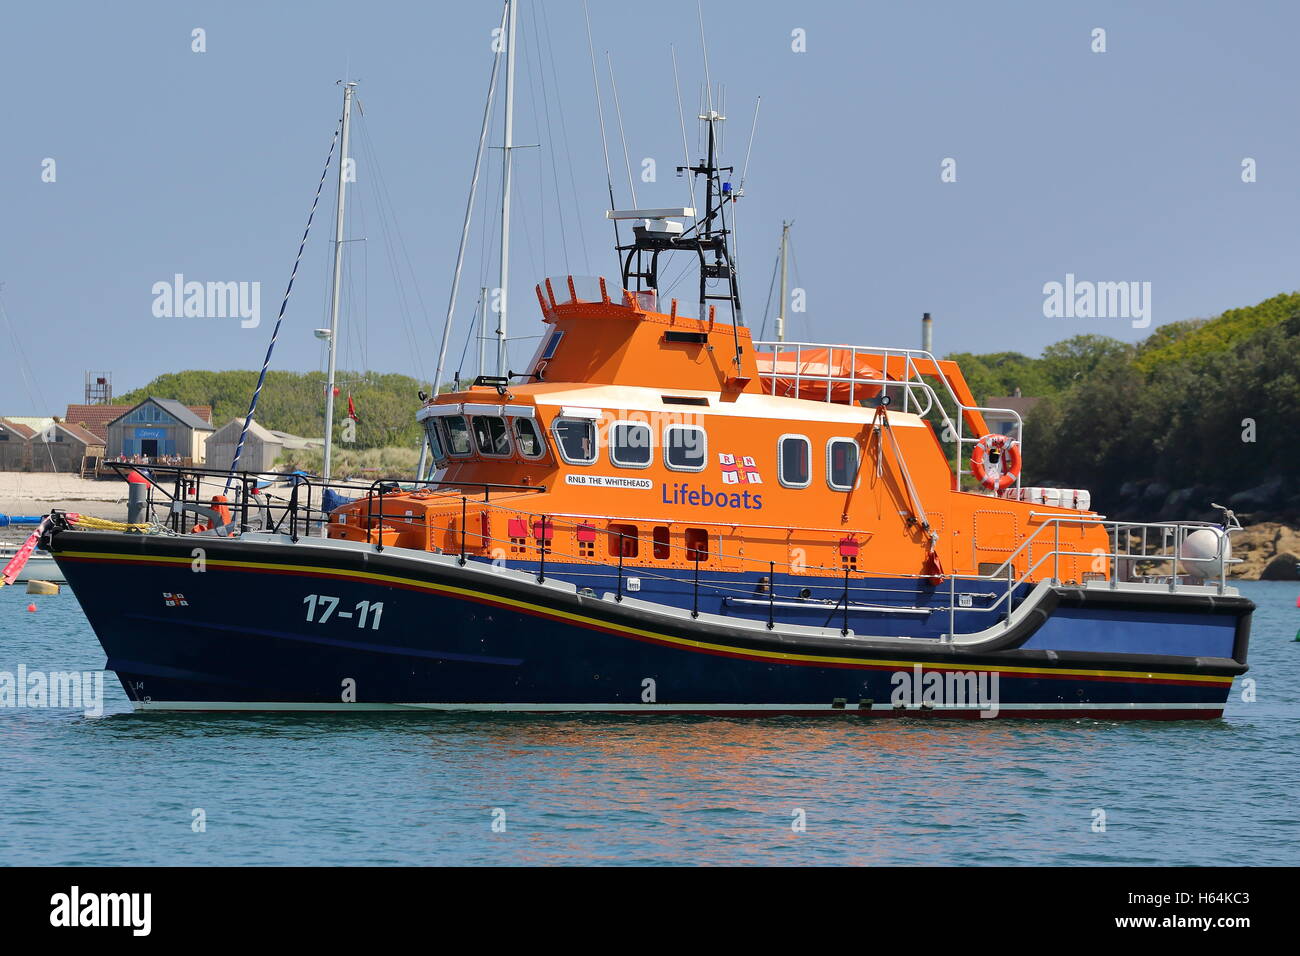 RNLB The Whiteheads Lifeboat 17-11 anchored at St Mary's harbour, Isles of Scilly, UK Stock Photo